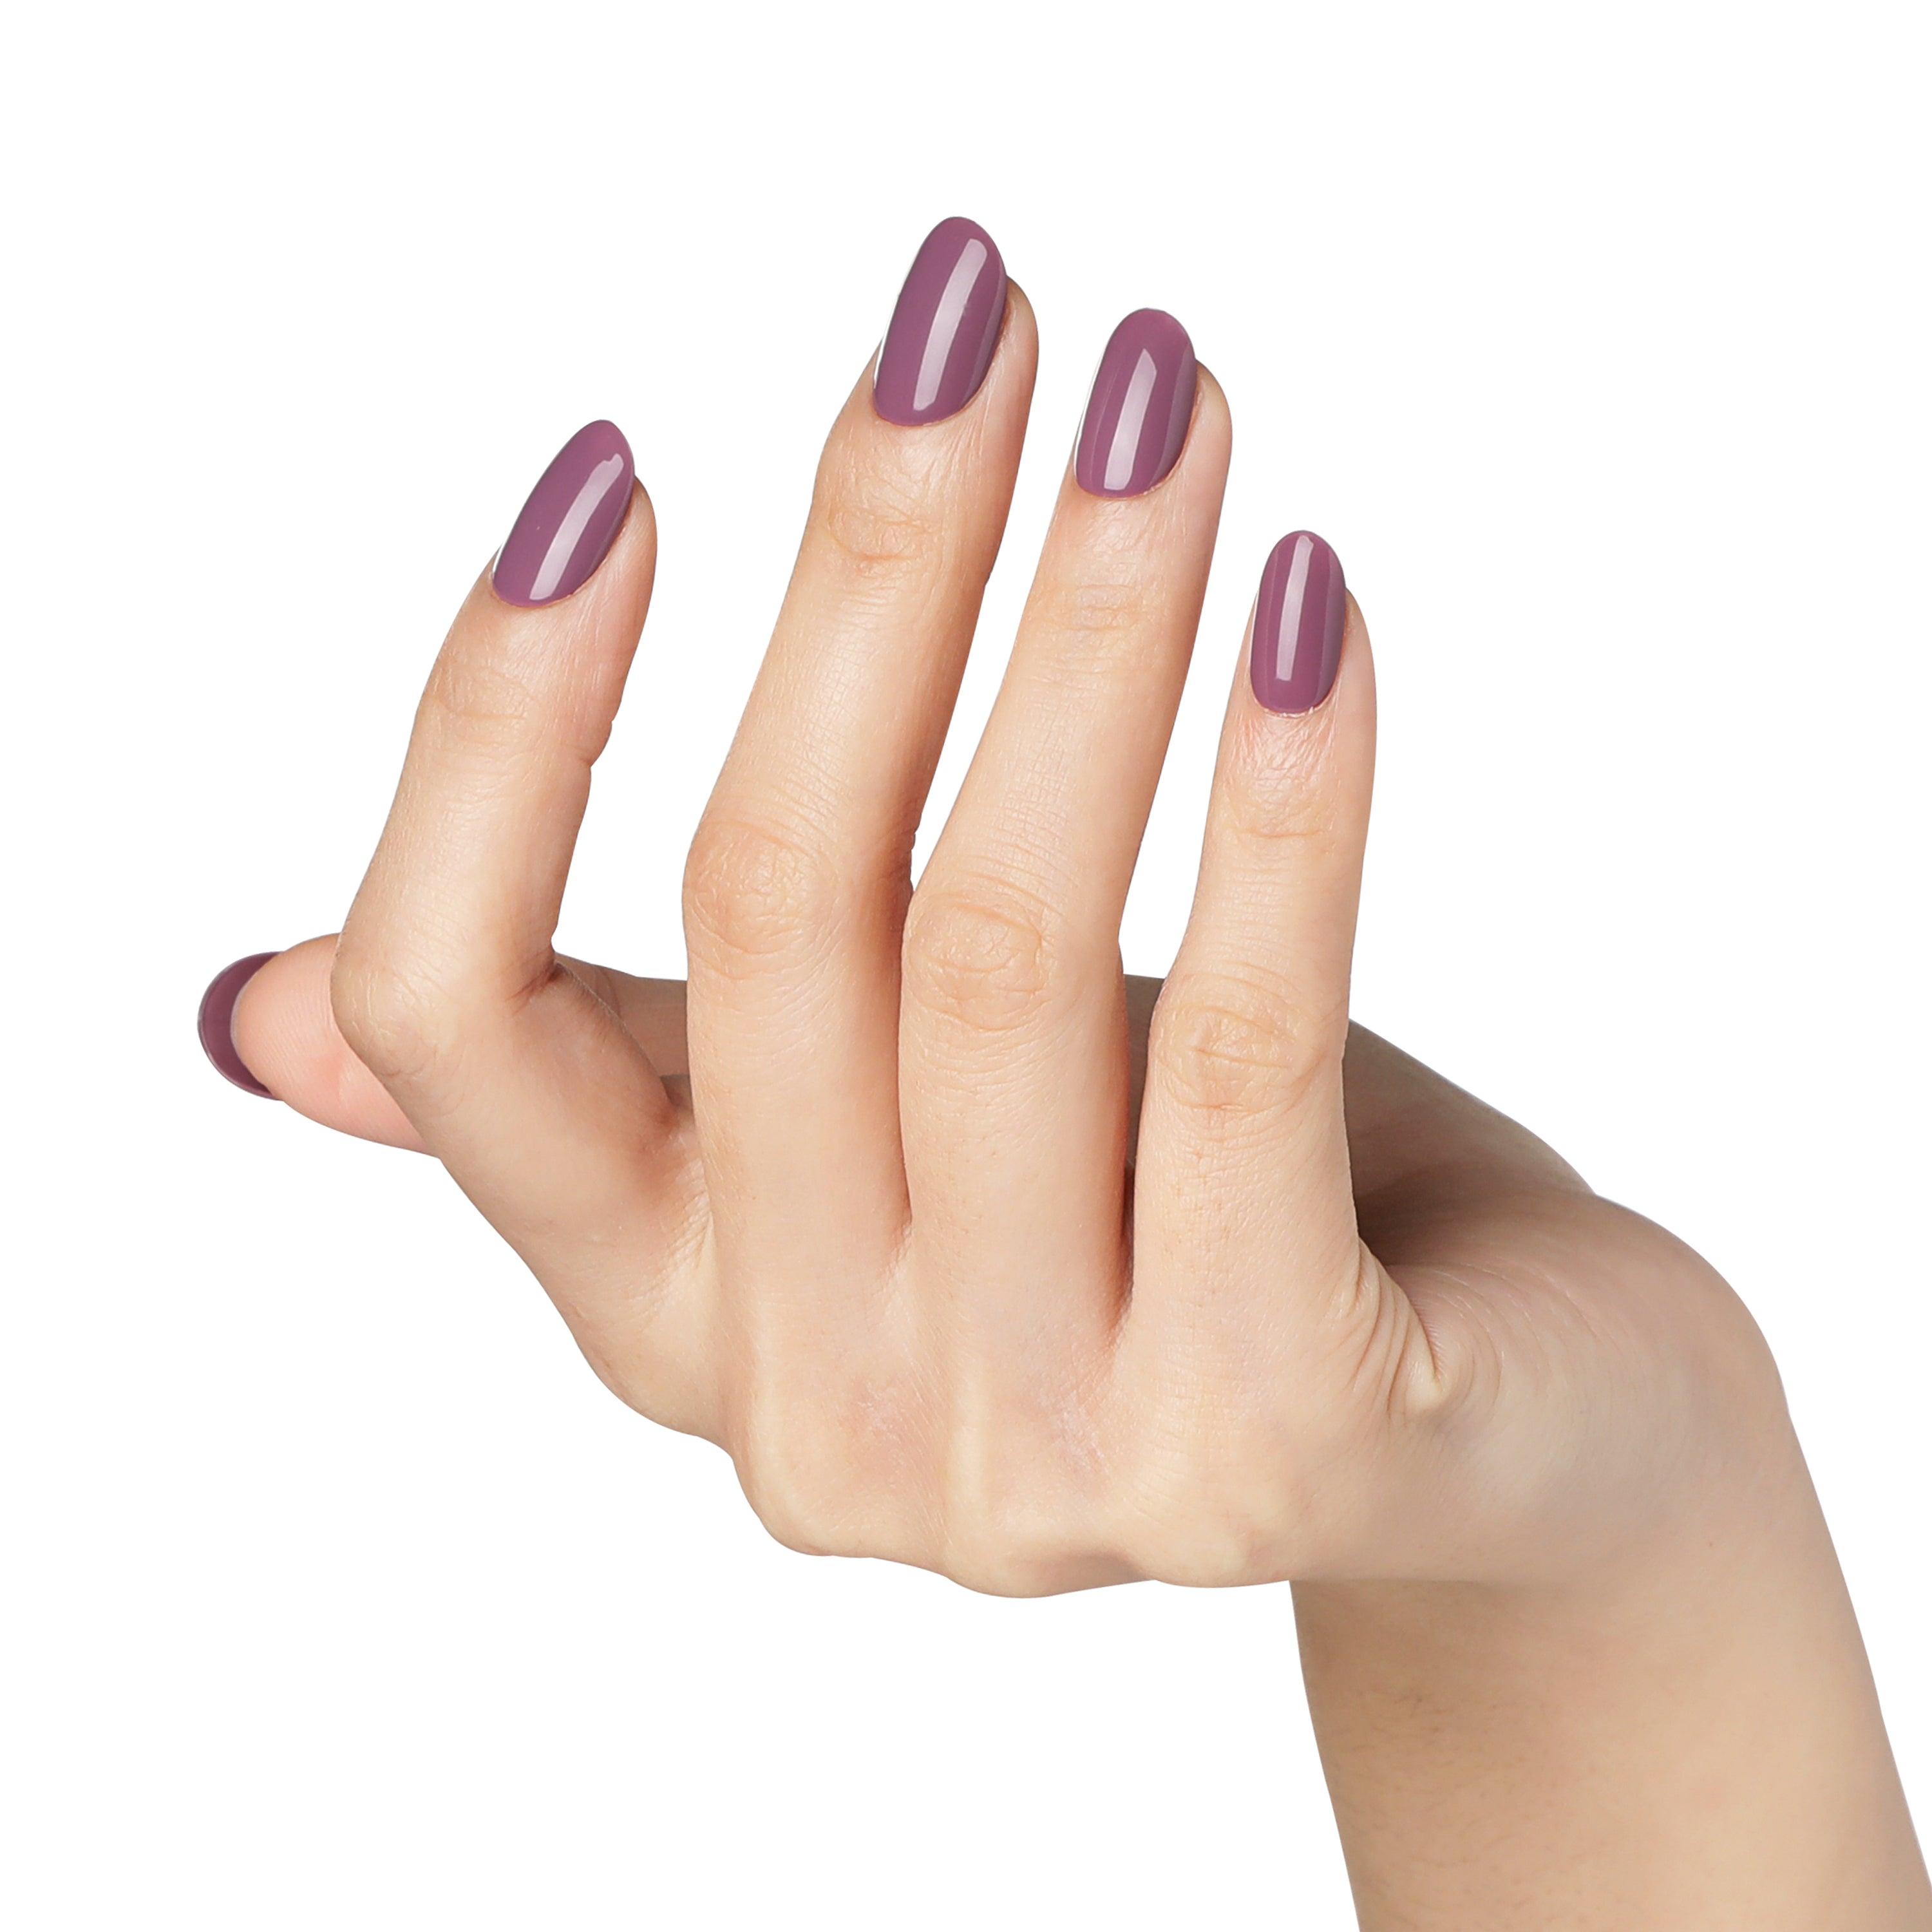 Amazon.com : Whats Up Nails - Tempest Nail Polish Mauve Pink Creme Lacquer  Varnish Made in USA 12 Free Cruelty Free Vegan Clean : Beauty & Personal  Care